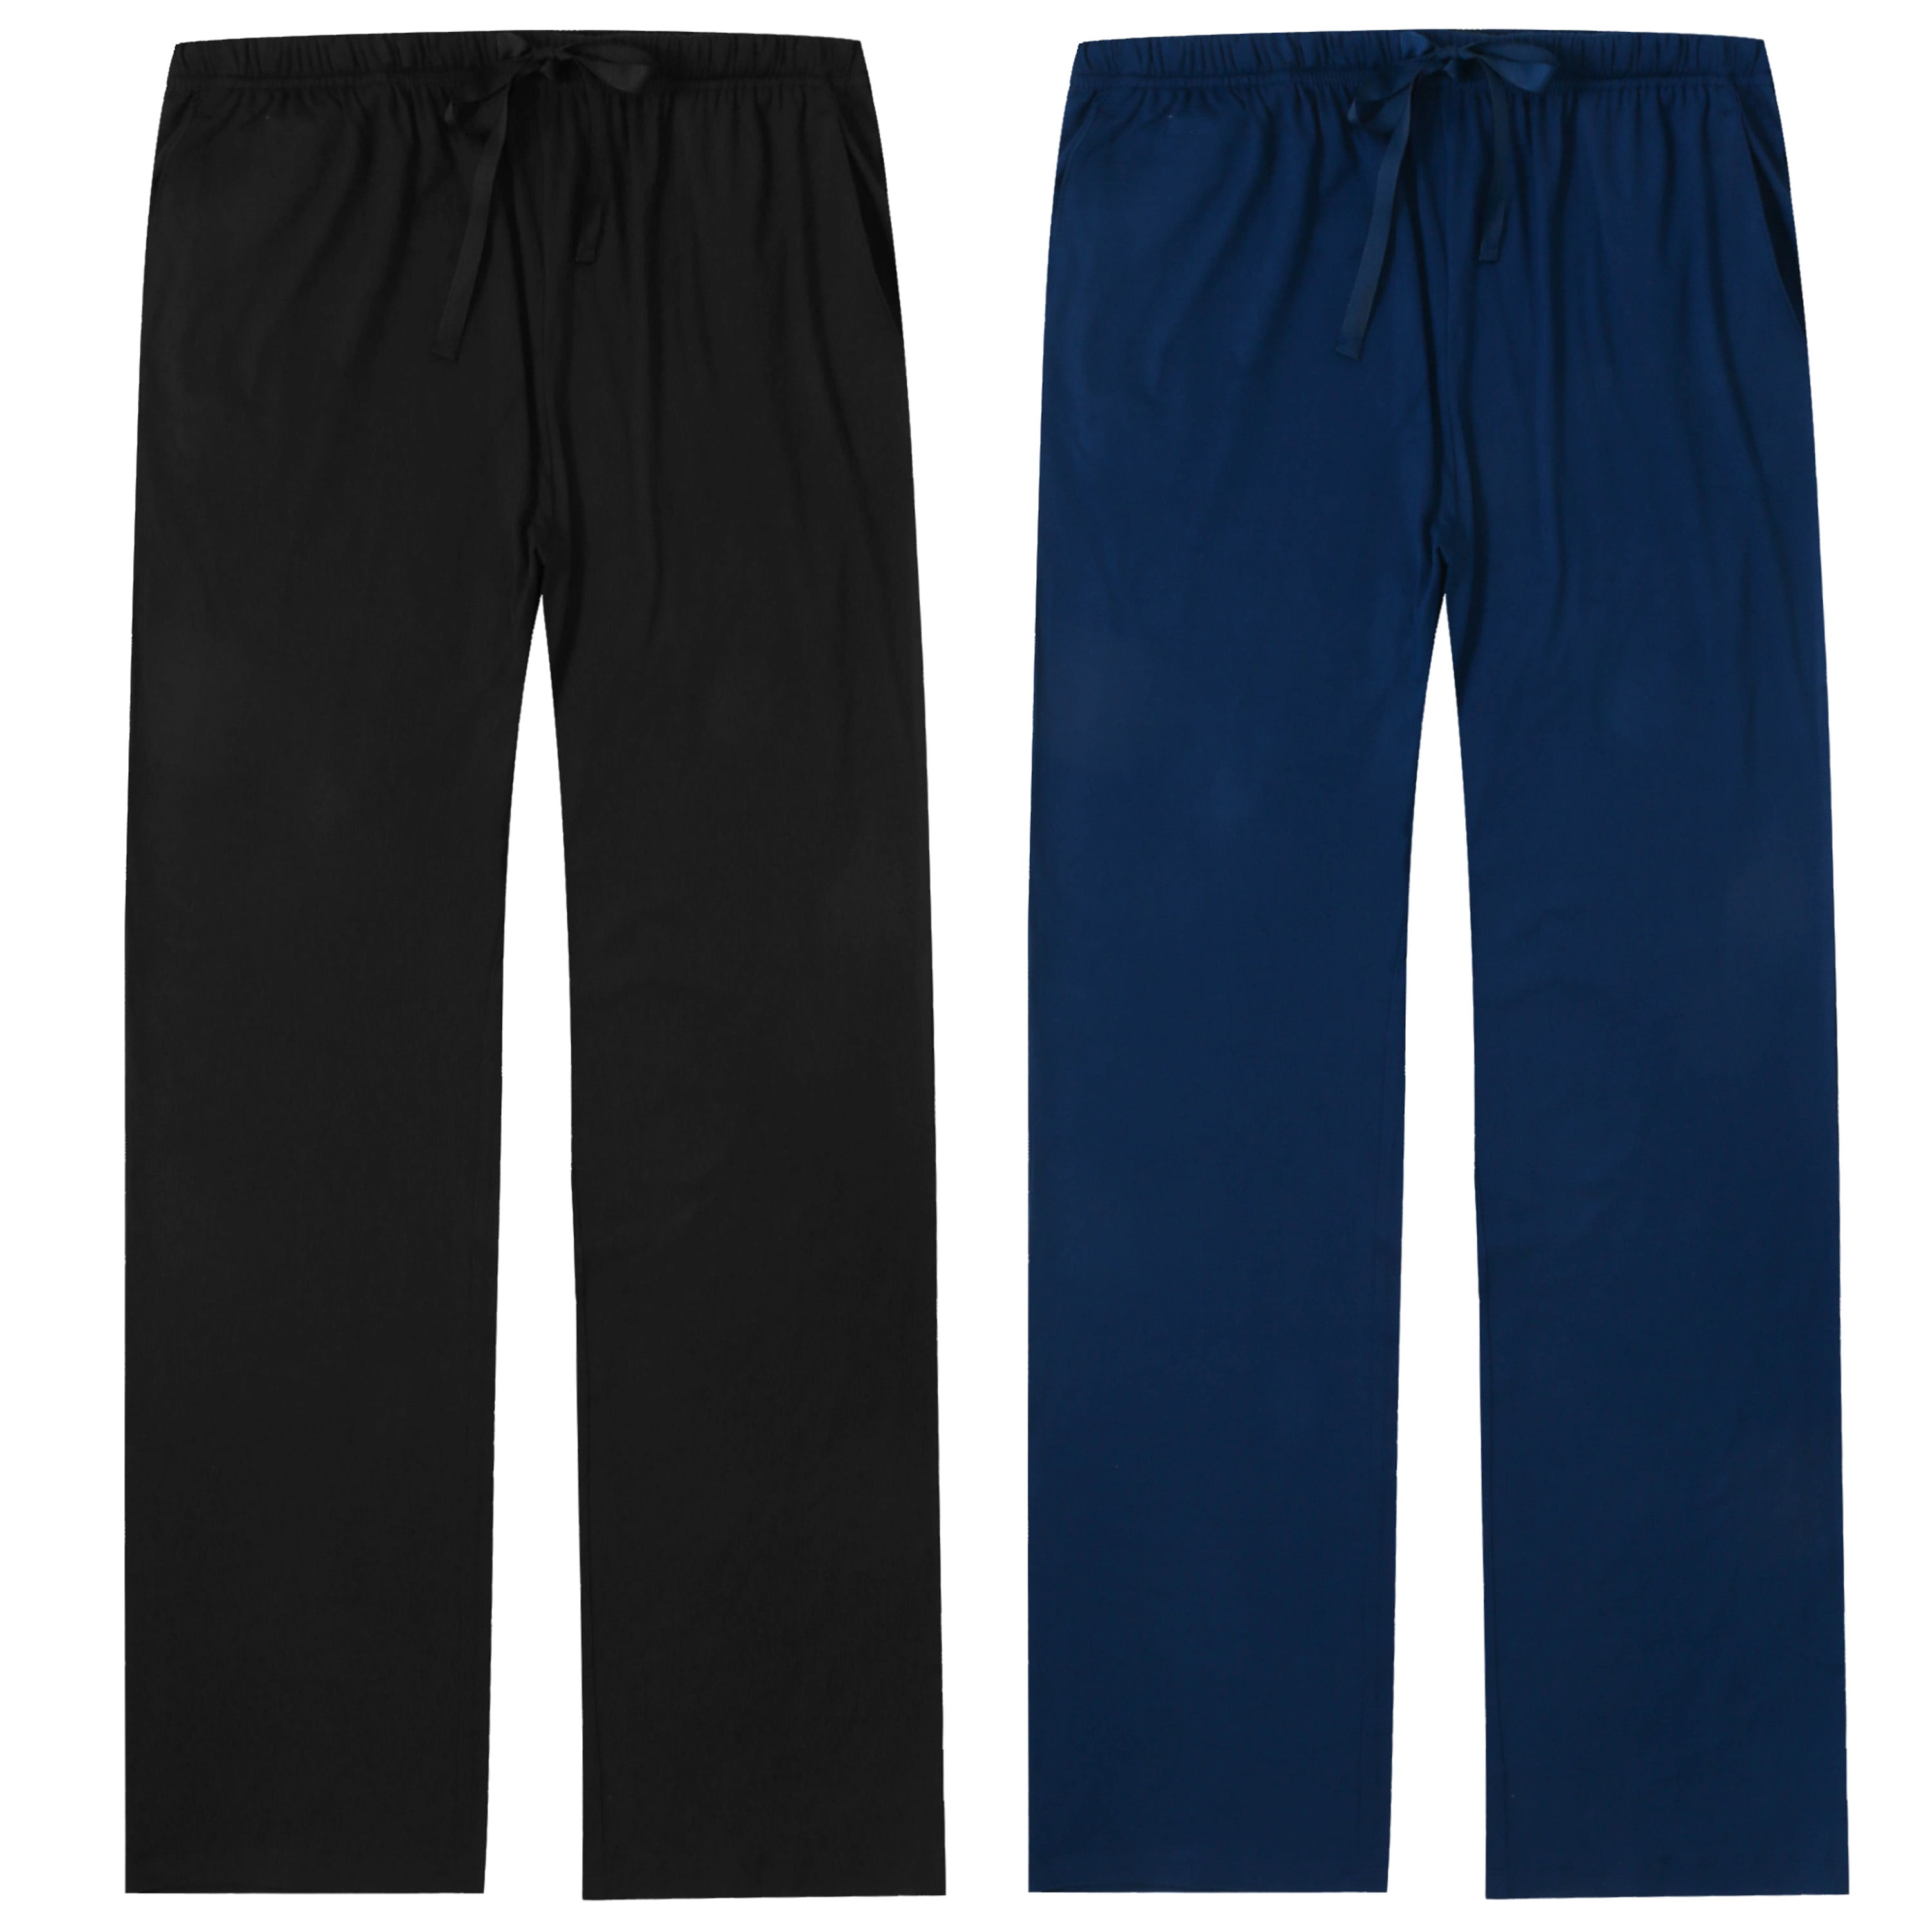 Noble Mount - Twin Boat Pajama Pants for Women - 2Pack - Super Soft ...